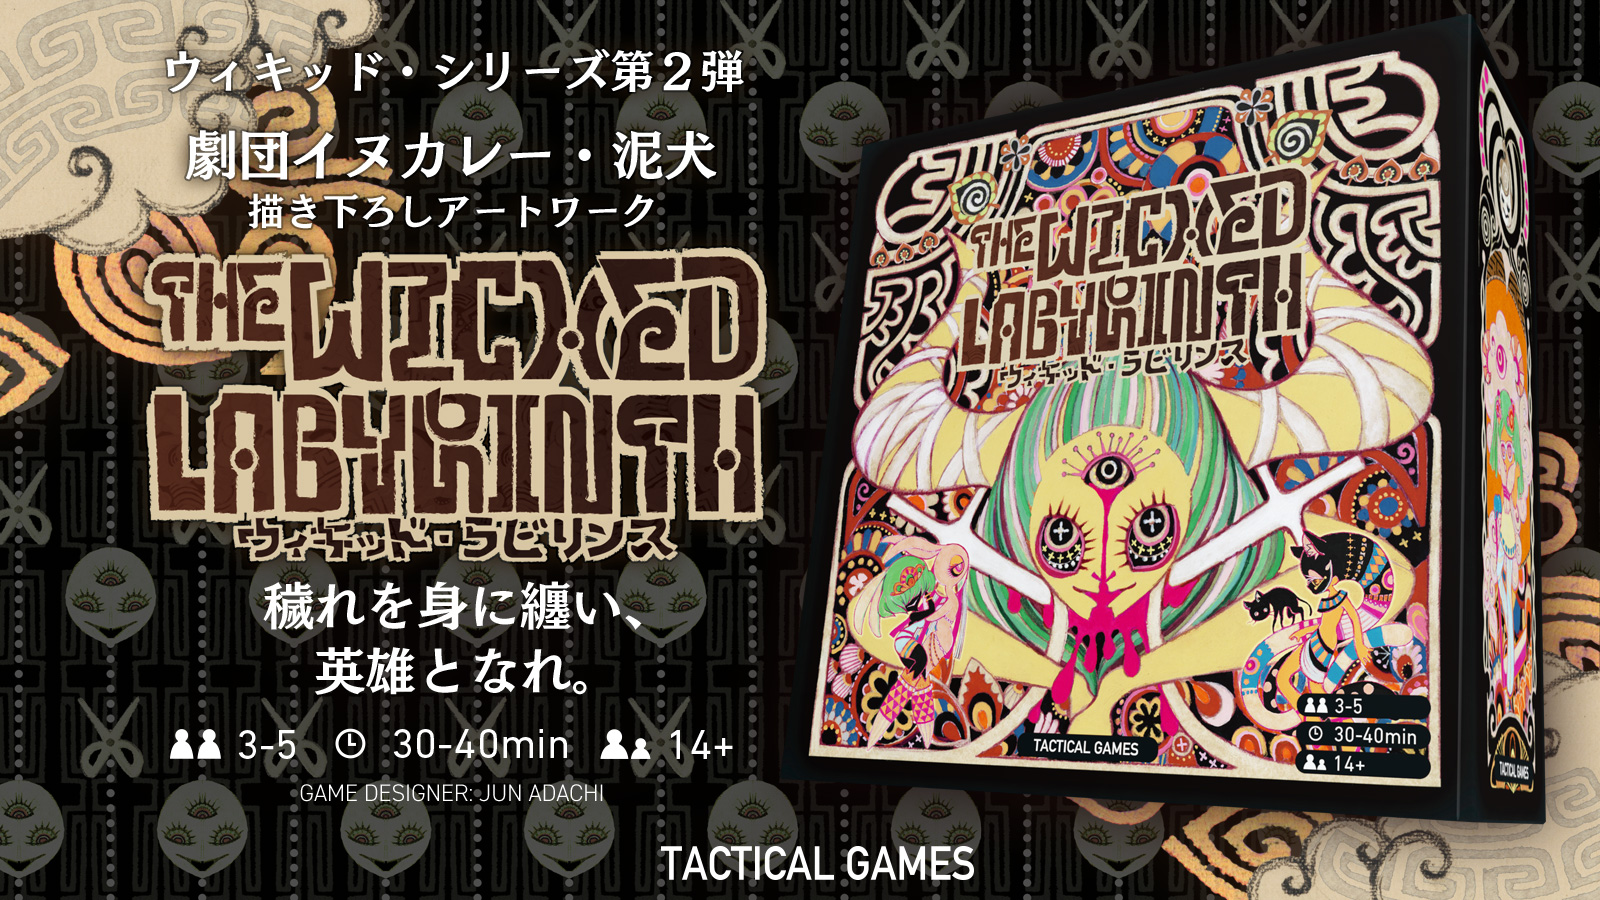 WICKED LABYRINTH『ウィキッド・ラビリンス』 - TACTICAL GAMES